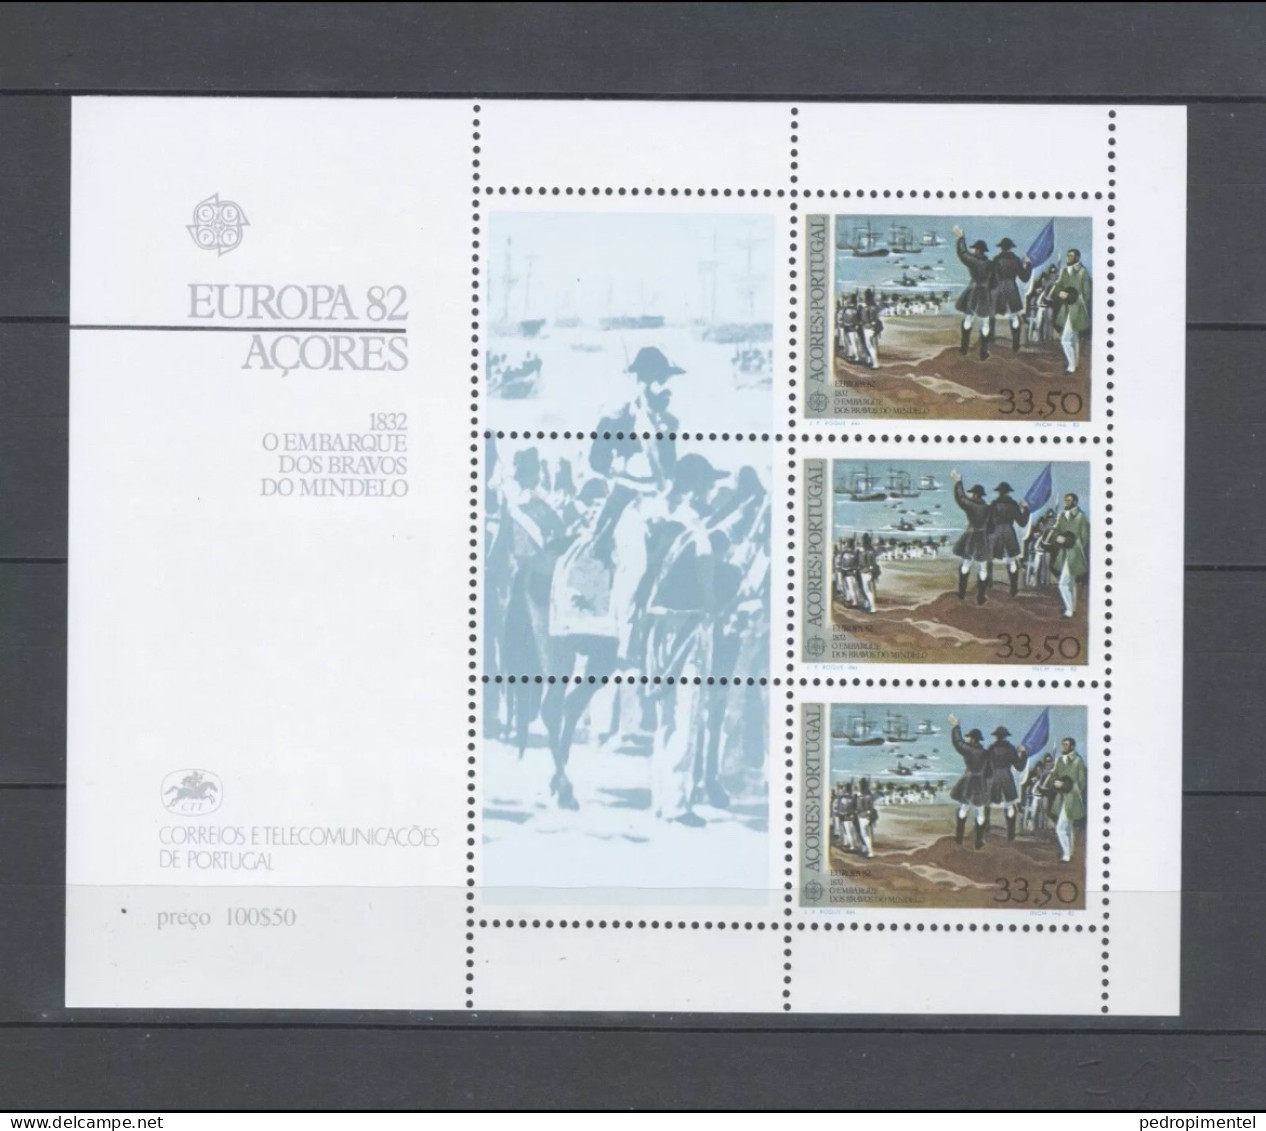 Portugal Azores Madeira 1982 "Europa CEPT Historical Events" Condition MNH OG Mundifil #1569-1571 (3 Minisheets) - Unused Stamps